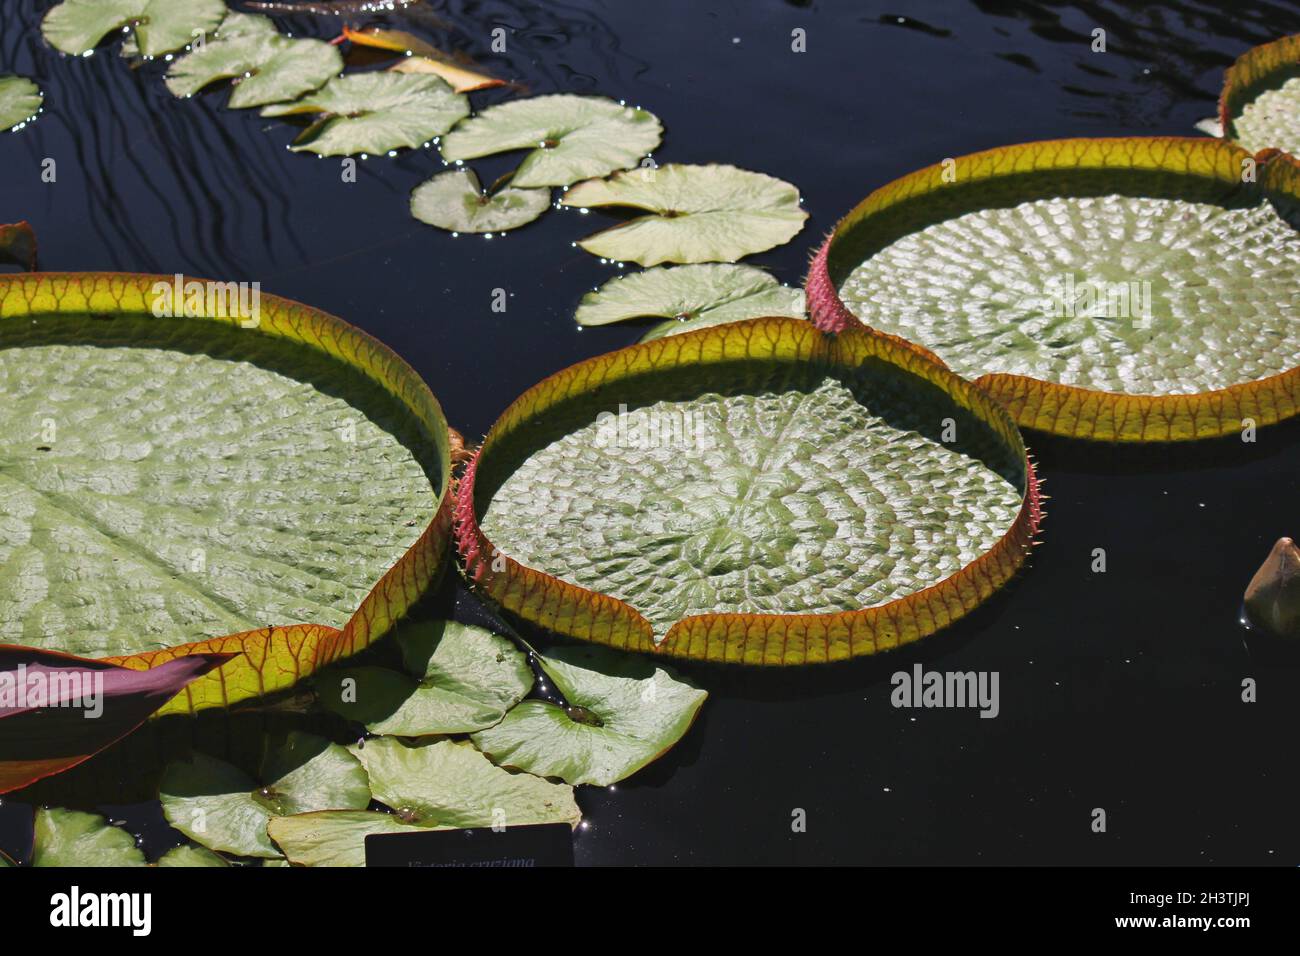 Huge giant lily pad floating in the pond Stock Photo - Alamy